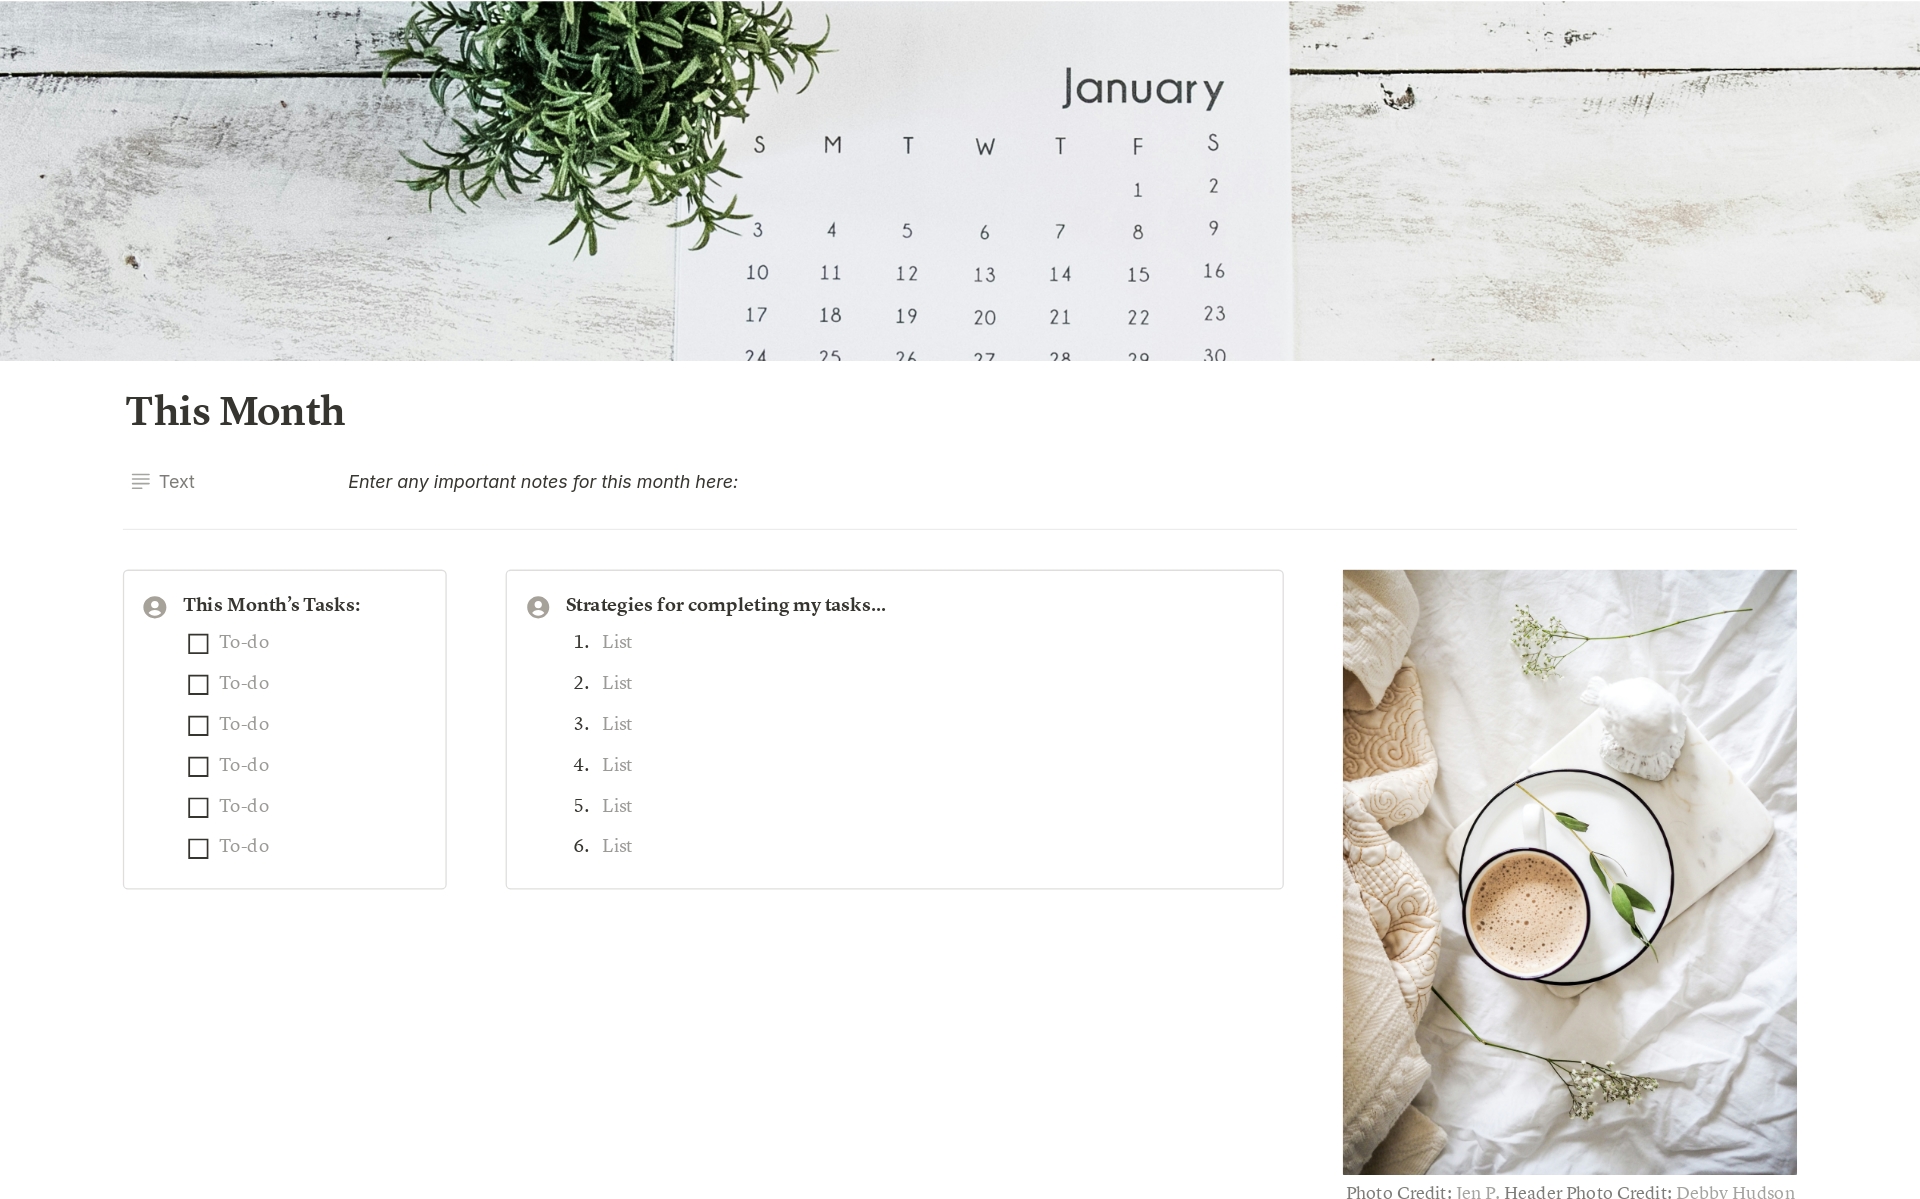 This template is perfect for anyone wishing to organize their life goals in one place. With a simple design and easy to use features, this planner includes a calendar, spaces for daily tasks and to-do's, and pages dedicated to weekly, monthly, and yearly goals. 